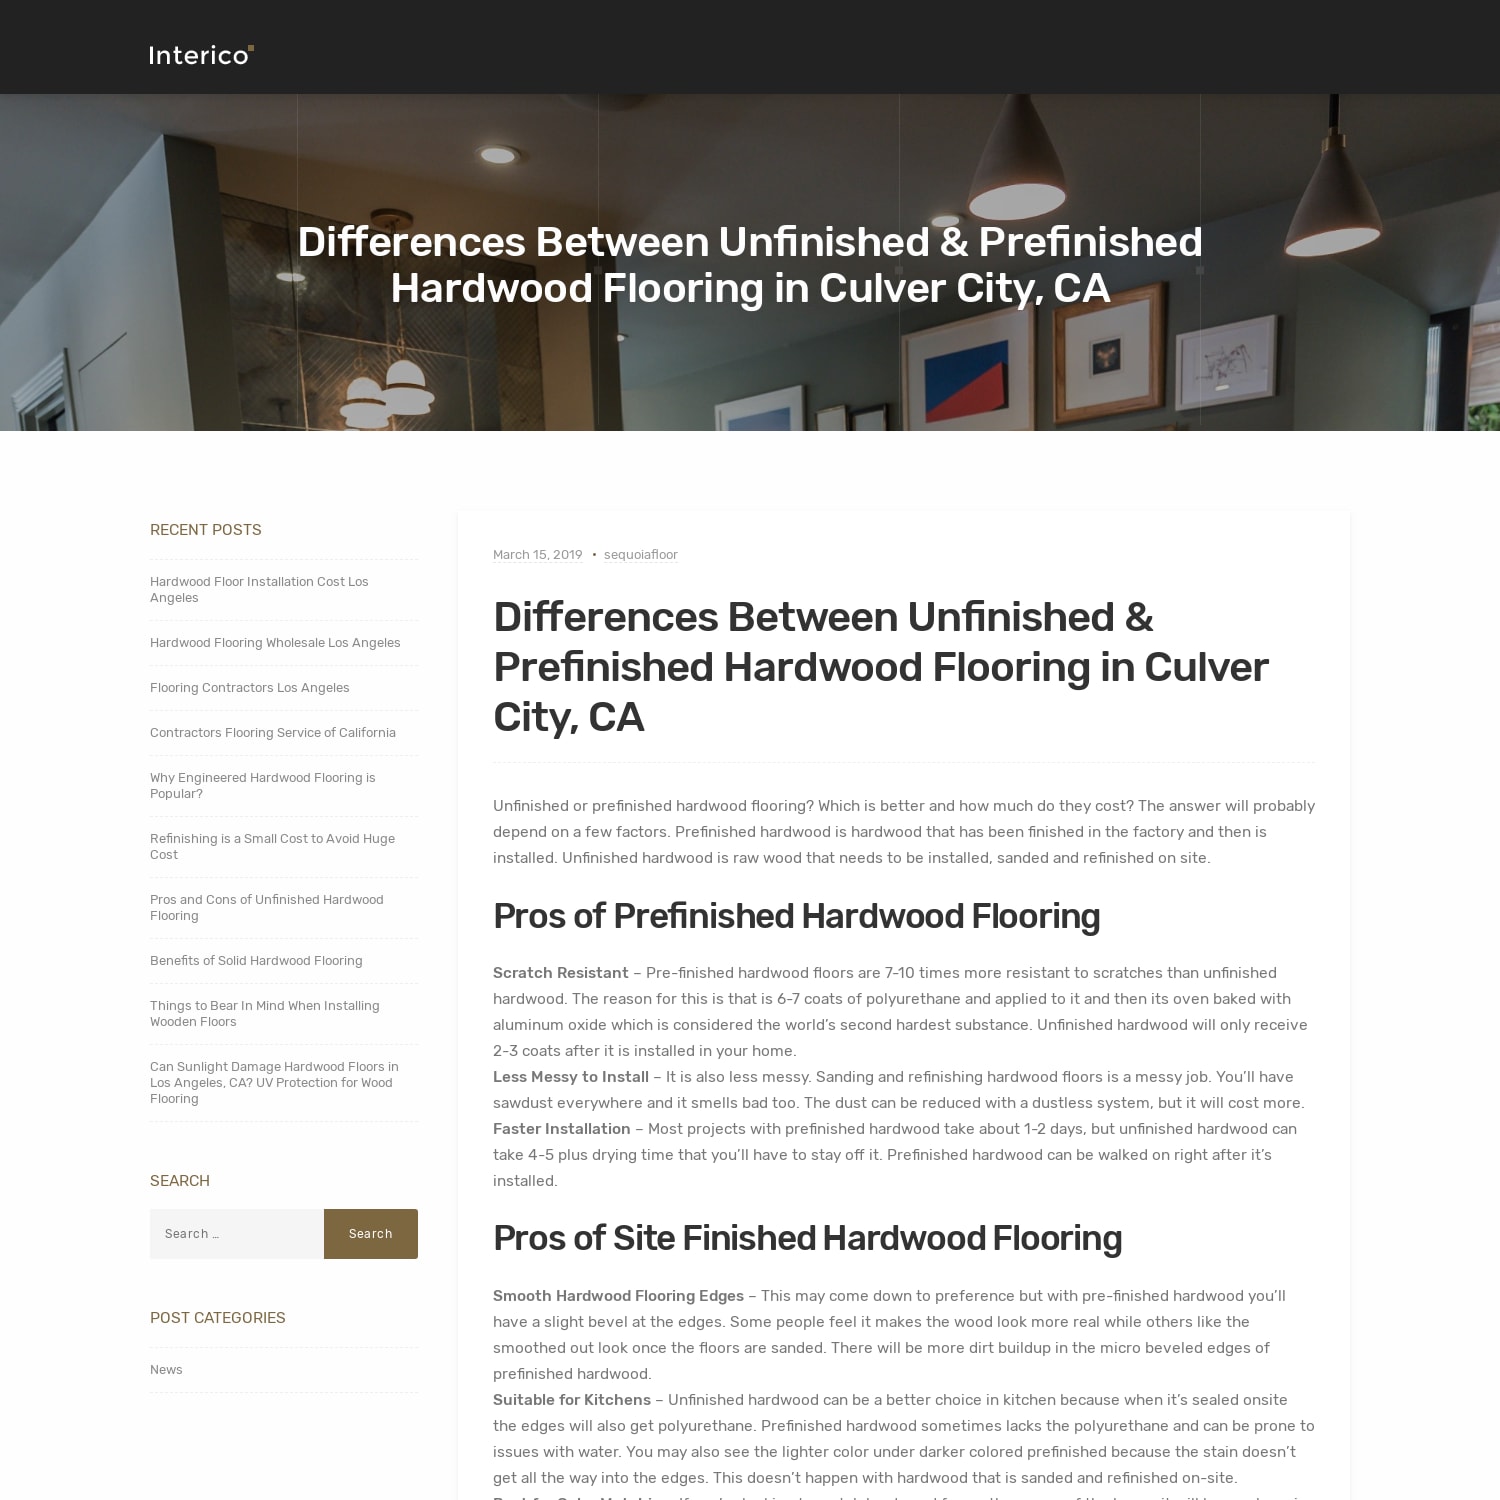 Differences Between Unfinished & Prefinished Hardwood Flooring in Culver City, CA